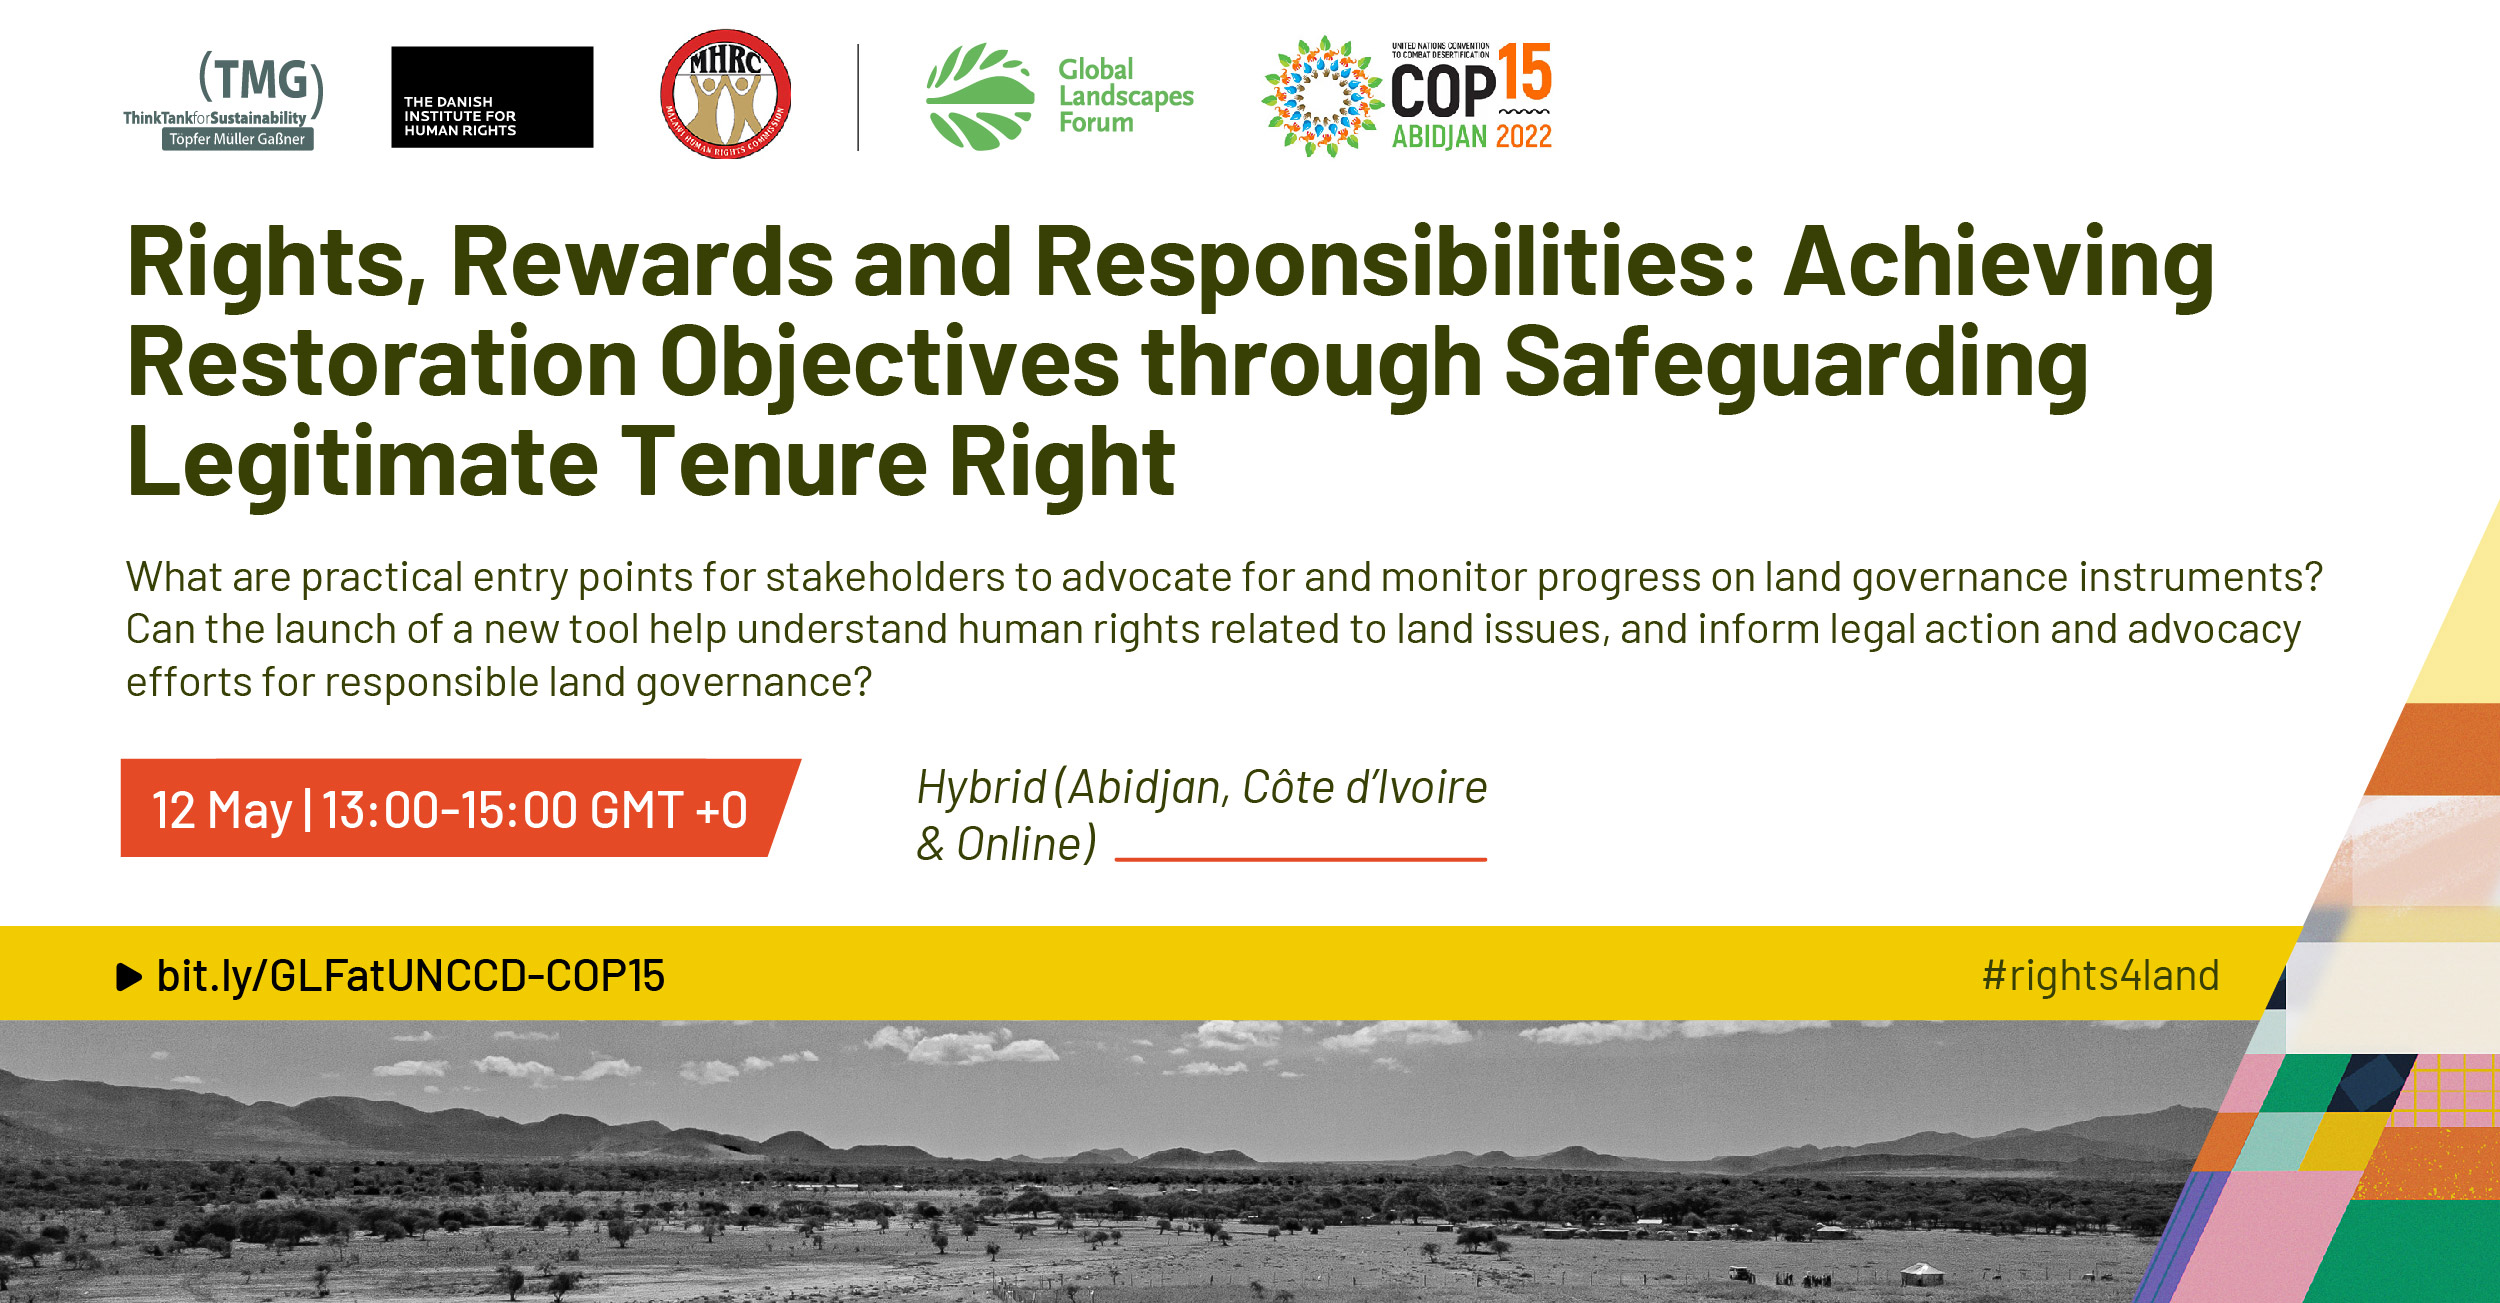 Rights, Rewards and Responsibilities: Achieving restoration objectives through safeguarding legitimate tenure rights